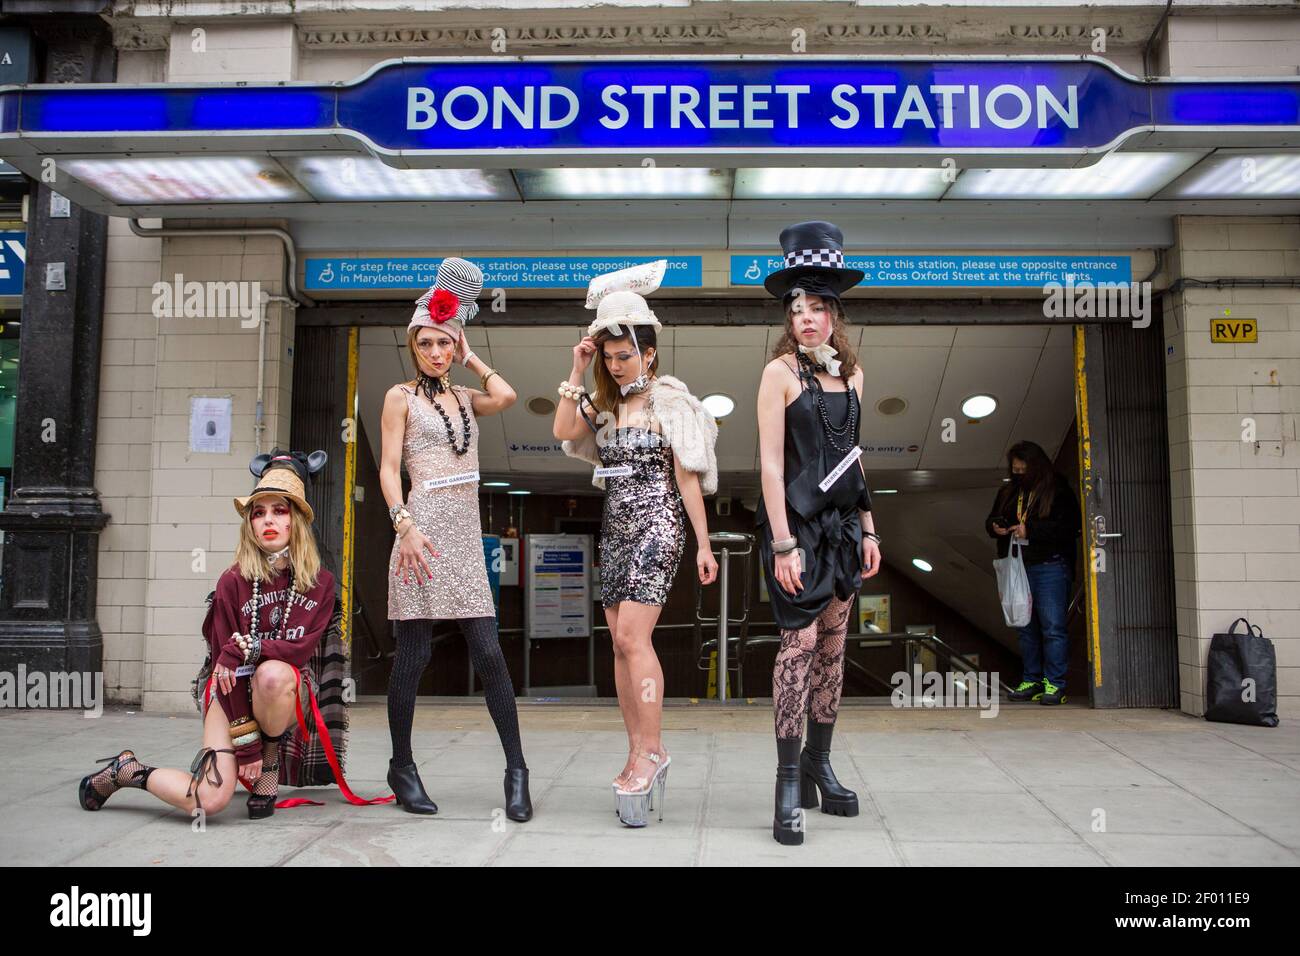 Models showcase Pierre Garroudi's latest colorful collection at one of the designer's specialty flash mob fashion shows in Bond Street,  London. Stock Photo